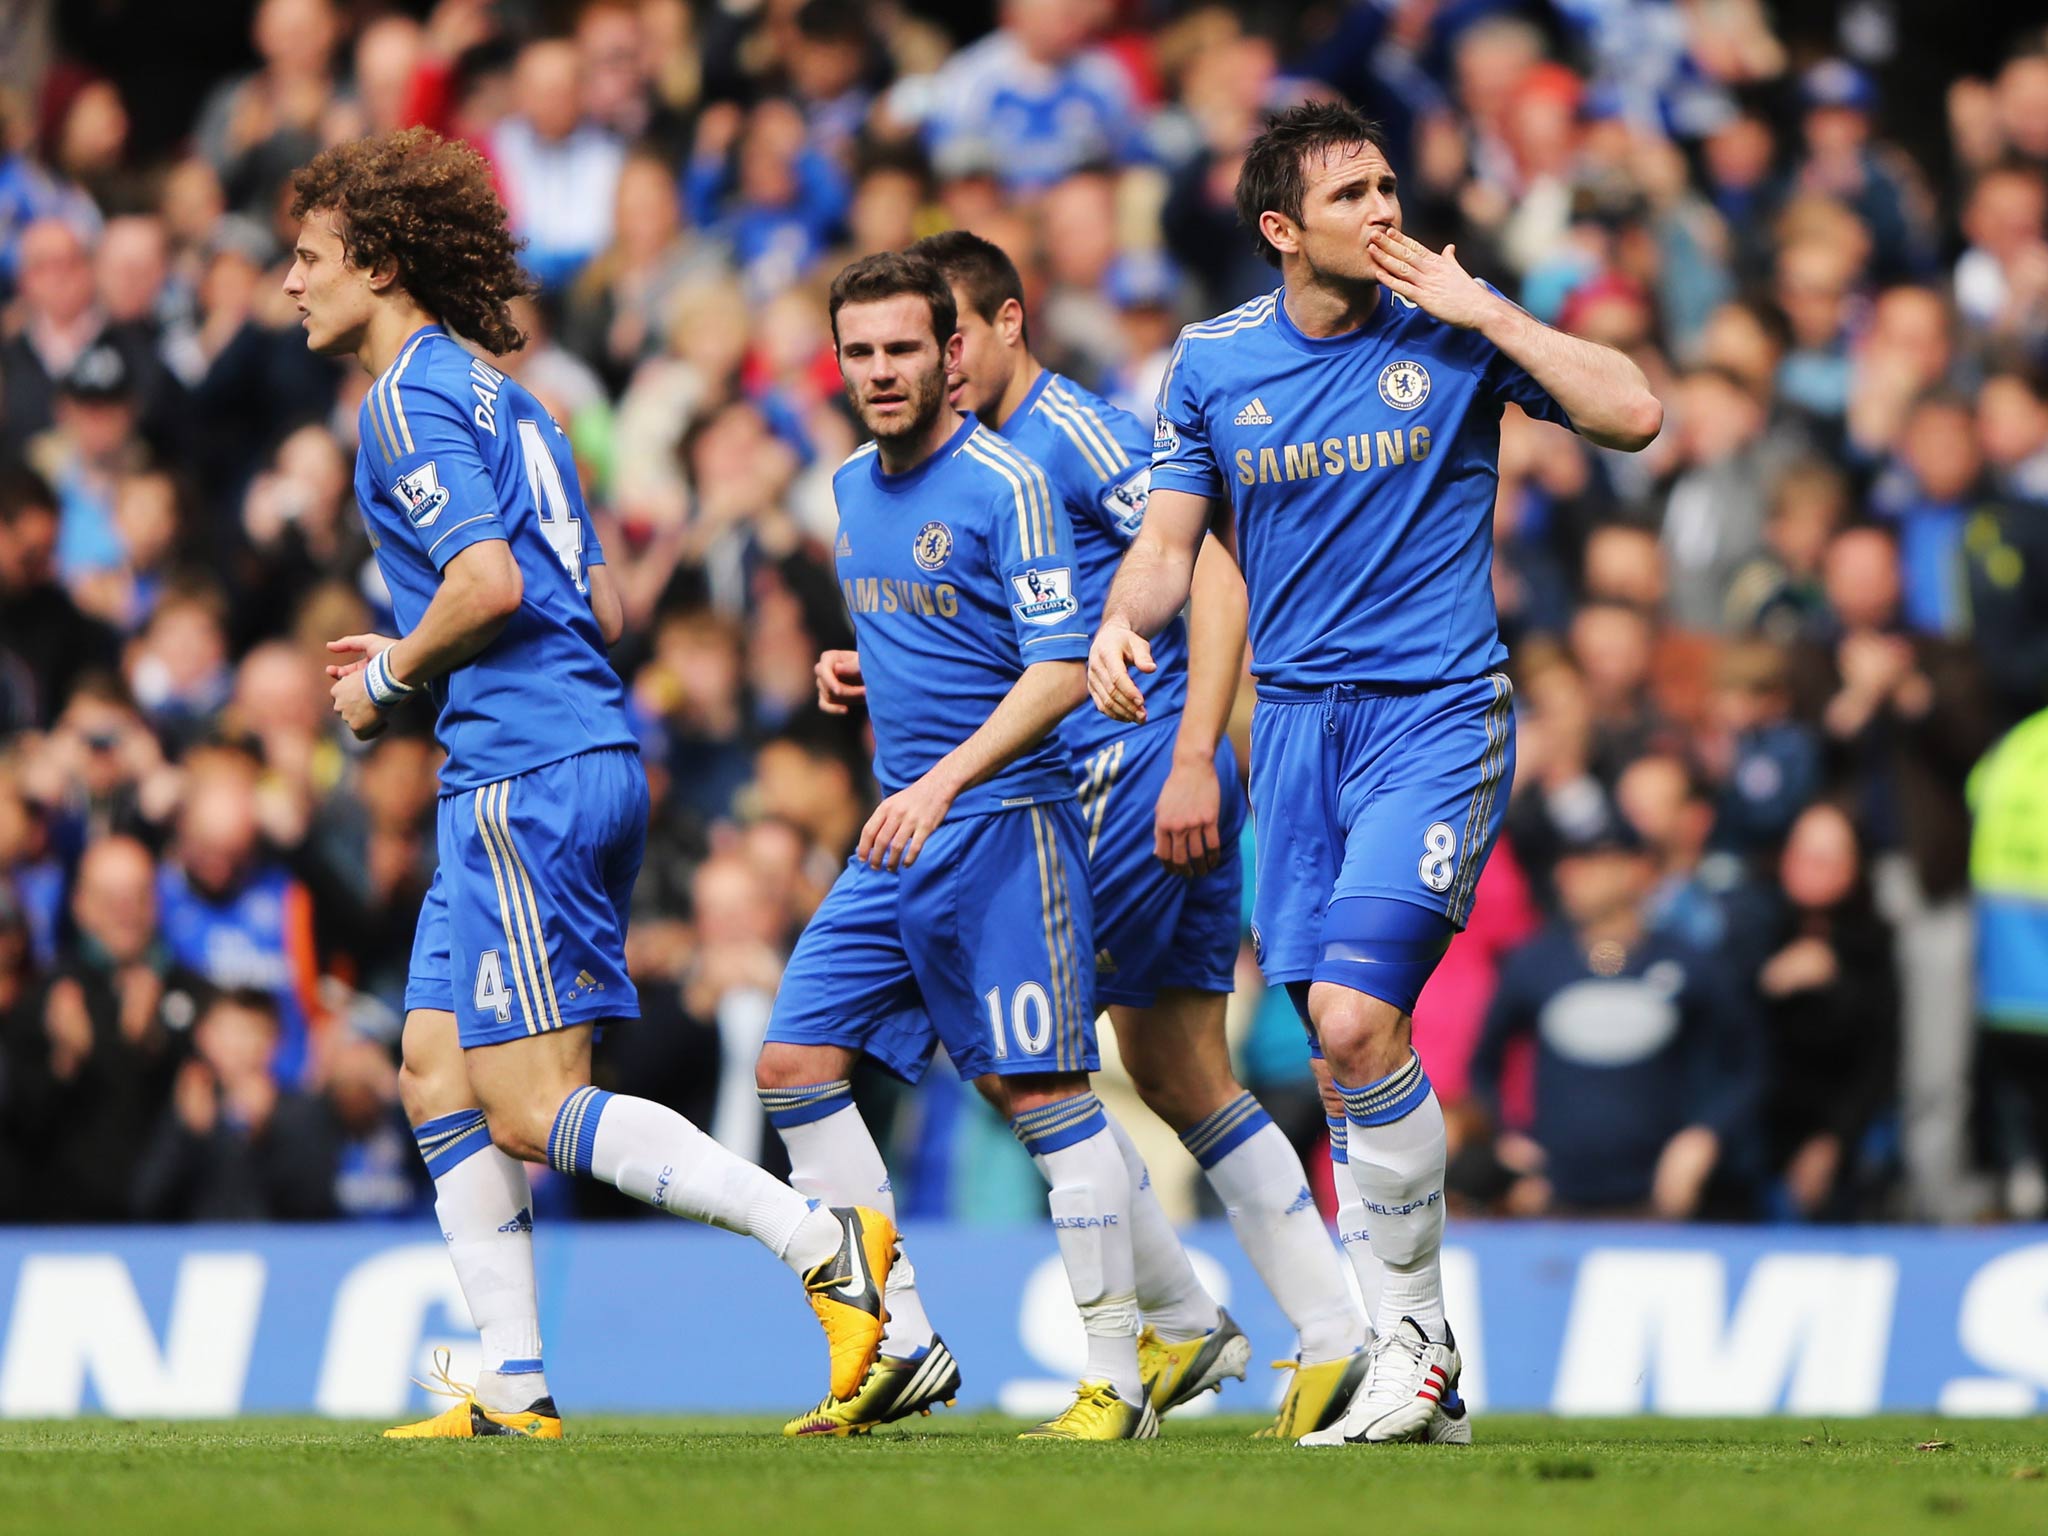 Frank Lampard celebrates his 201st goal for Chelsea